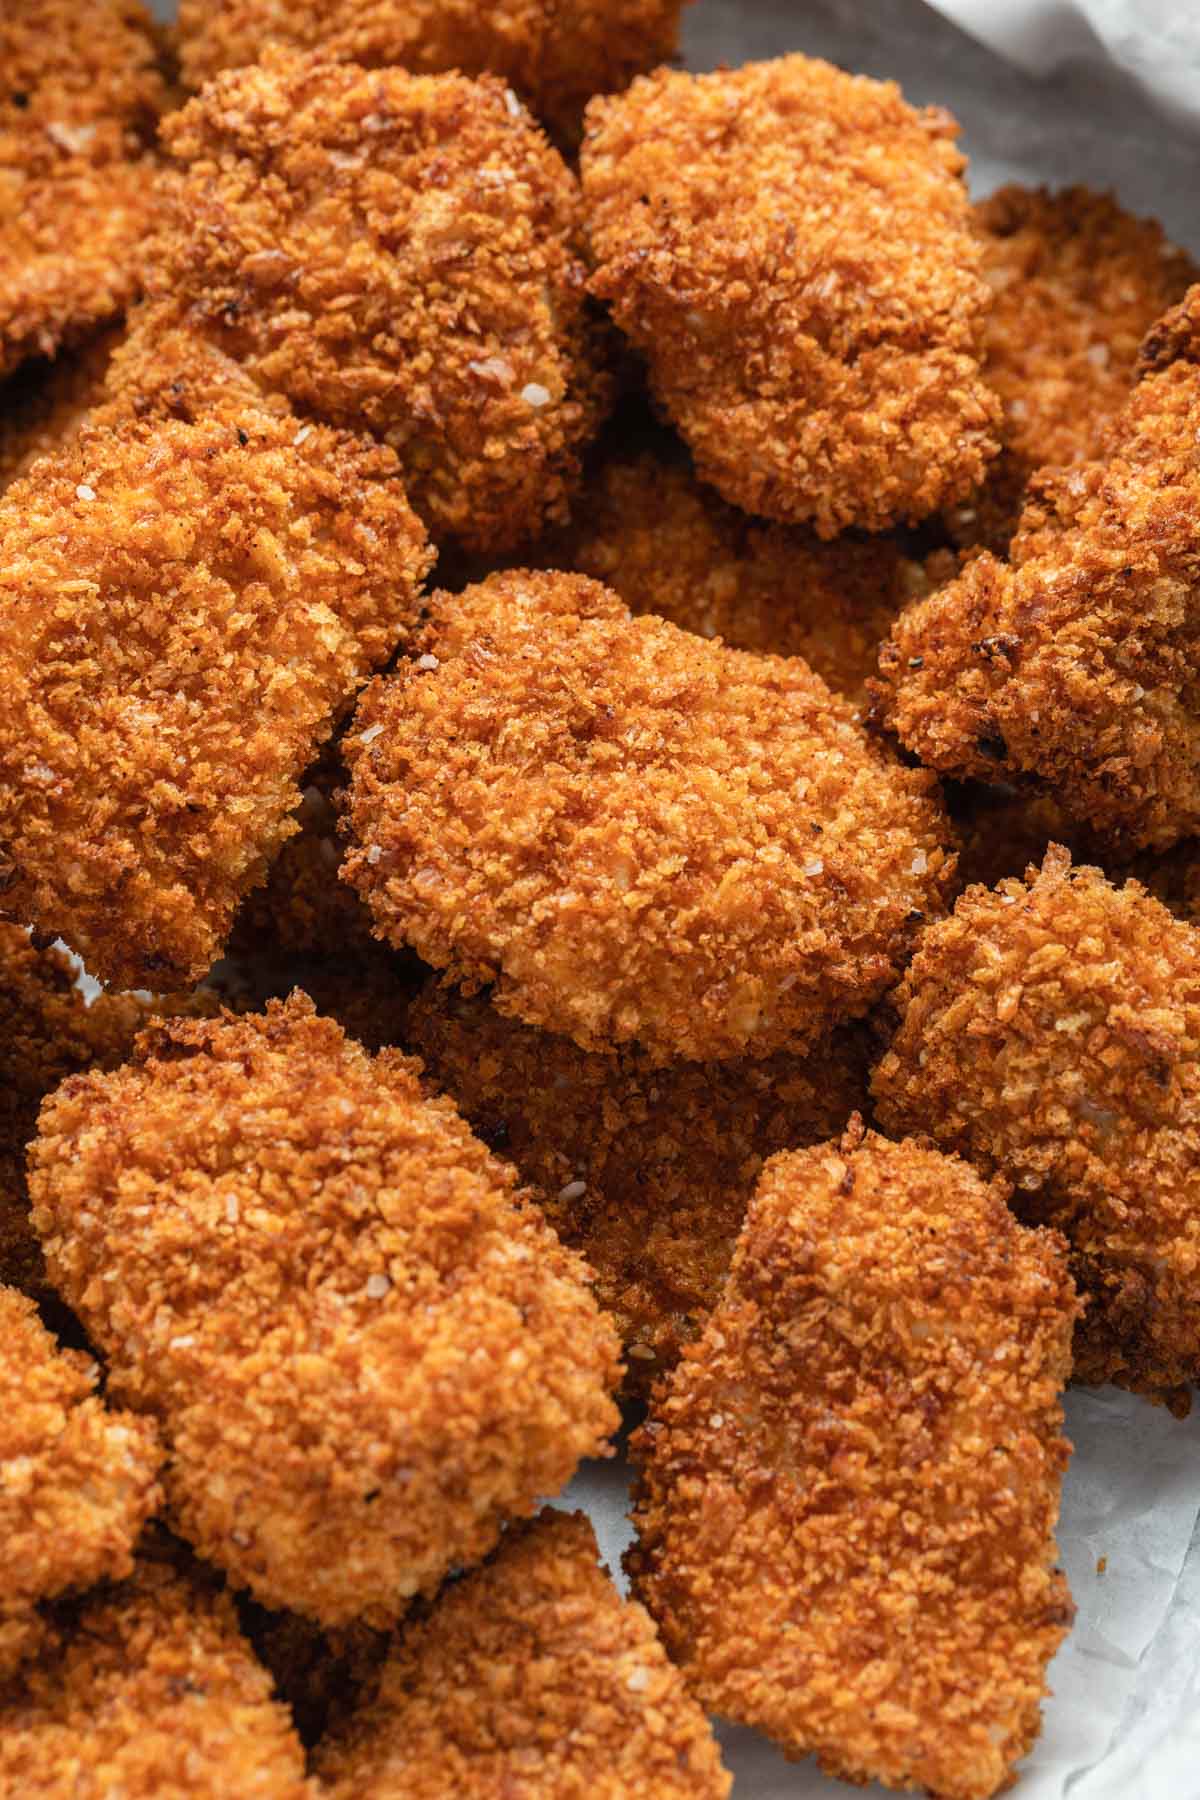 Overhead view of air fryer chicken bites arranged closely together.